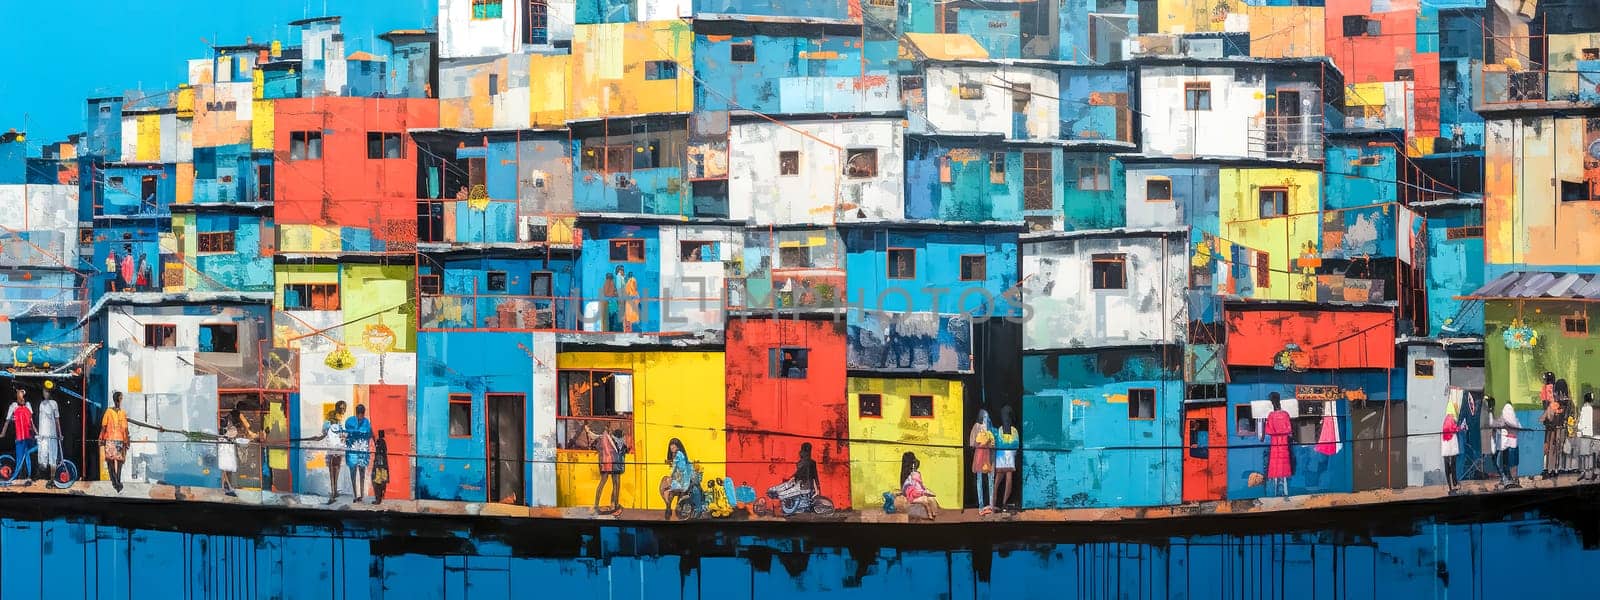 A vivid riverside favela in South America with a patchwork of colorful houses reflecting on the water, people engaging in daily life. by Edophoto